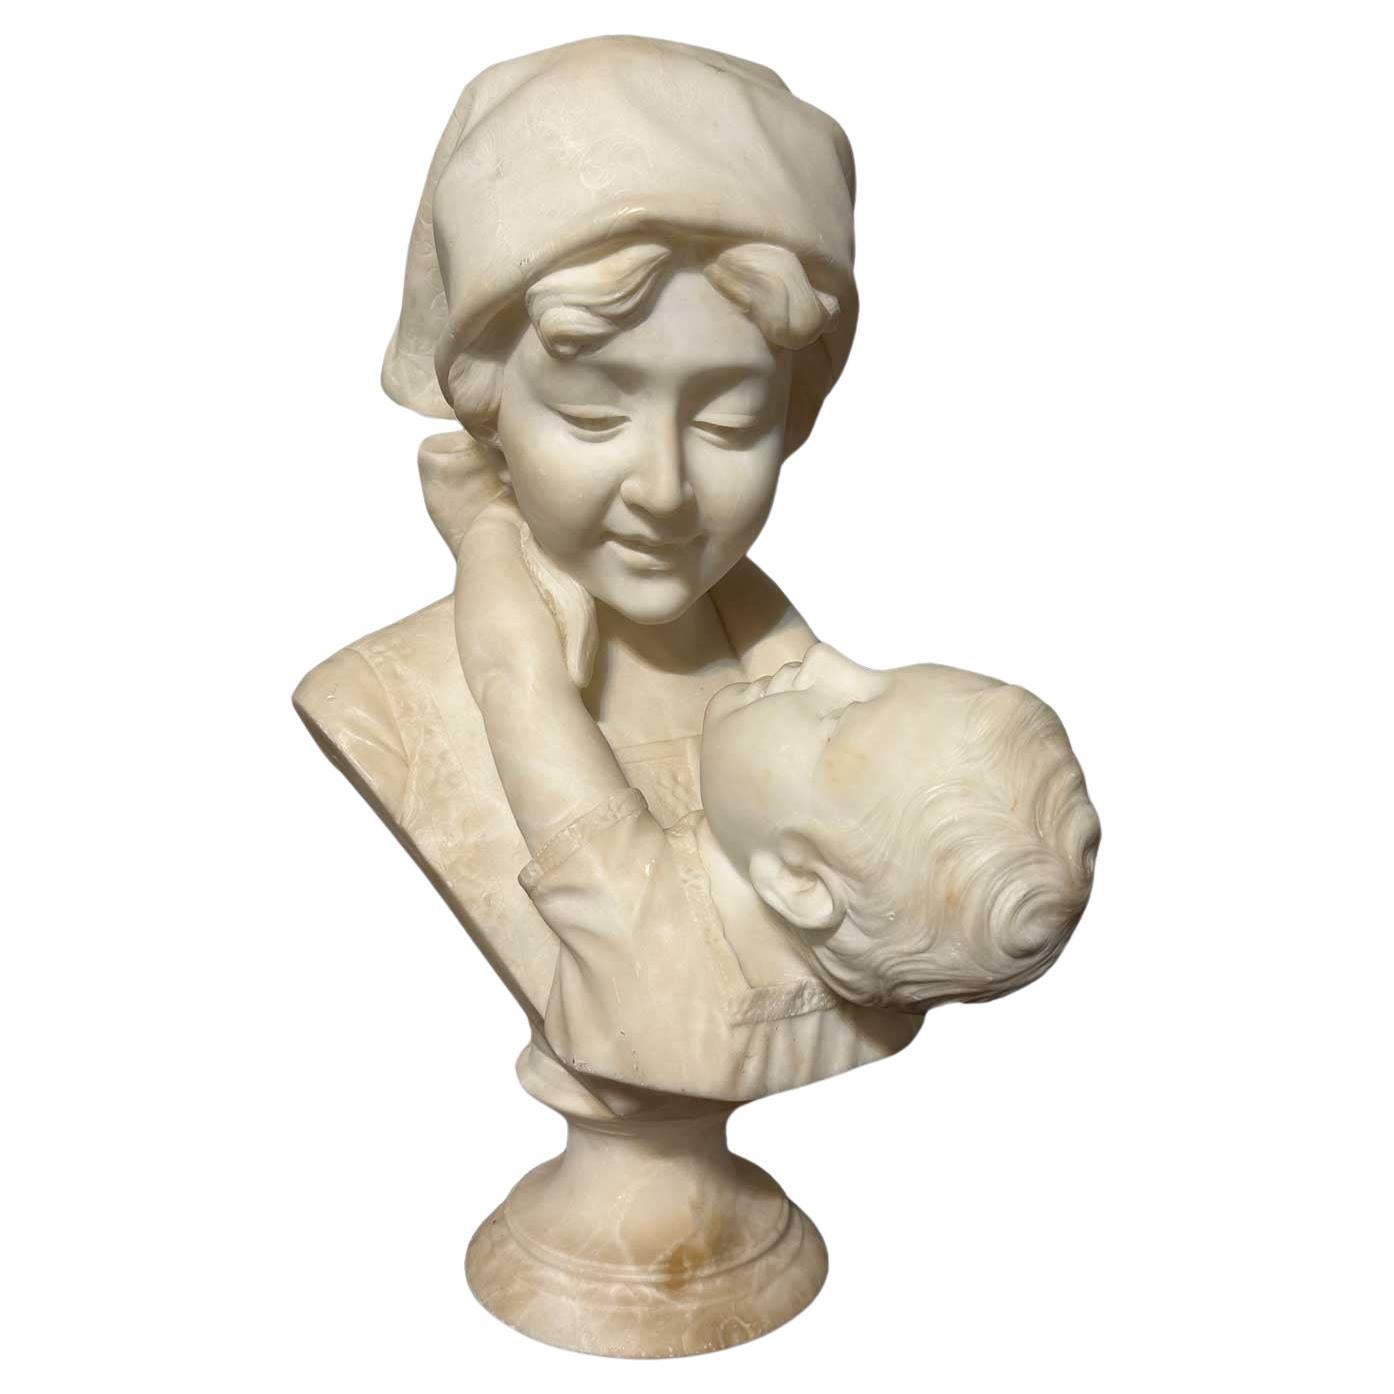 ANTONIO TANTARDINI, BUST OF A WOMAN, 19th and 20th Century Sculpture, Sculpture